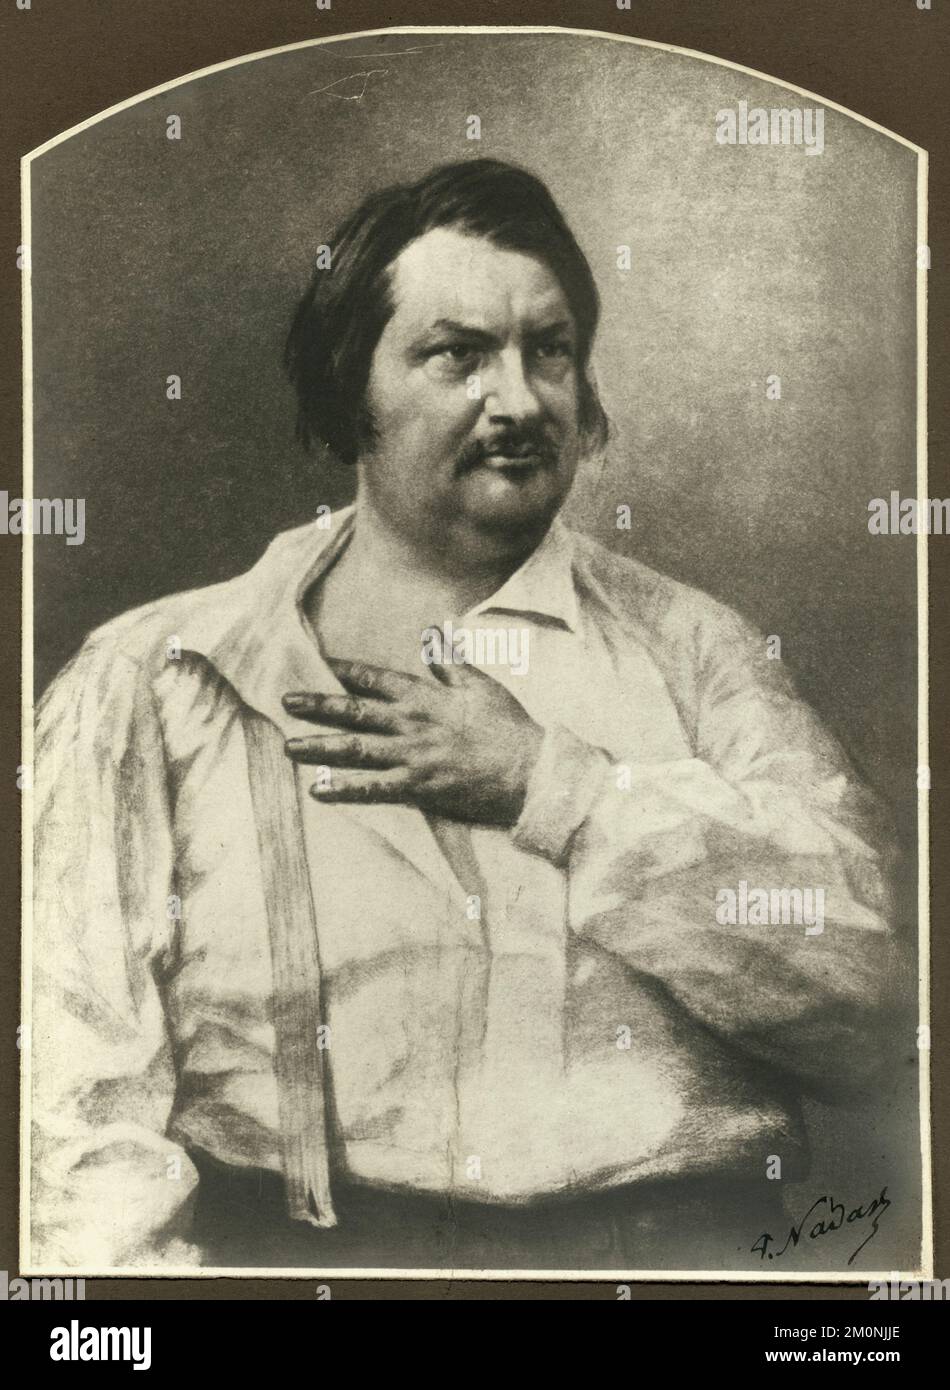 Portrait of French novelist and playwright Honoré de Balzac (1799 - 1850), 1842 / 1891. Photography by Louis Auguste-Bisson (1814 - 1876), 1842; reproduced by Paul Nadar (1856–1939), 1891 Stock Photo